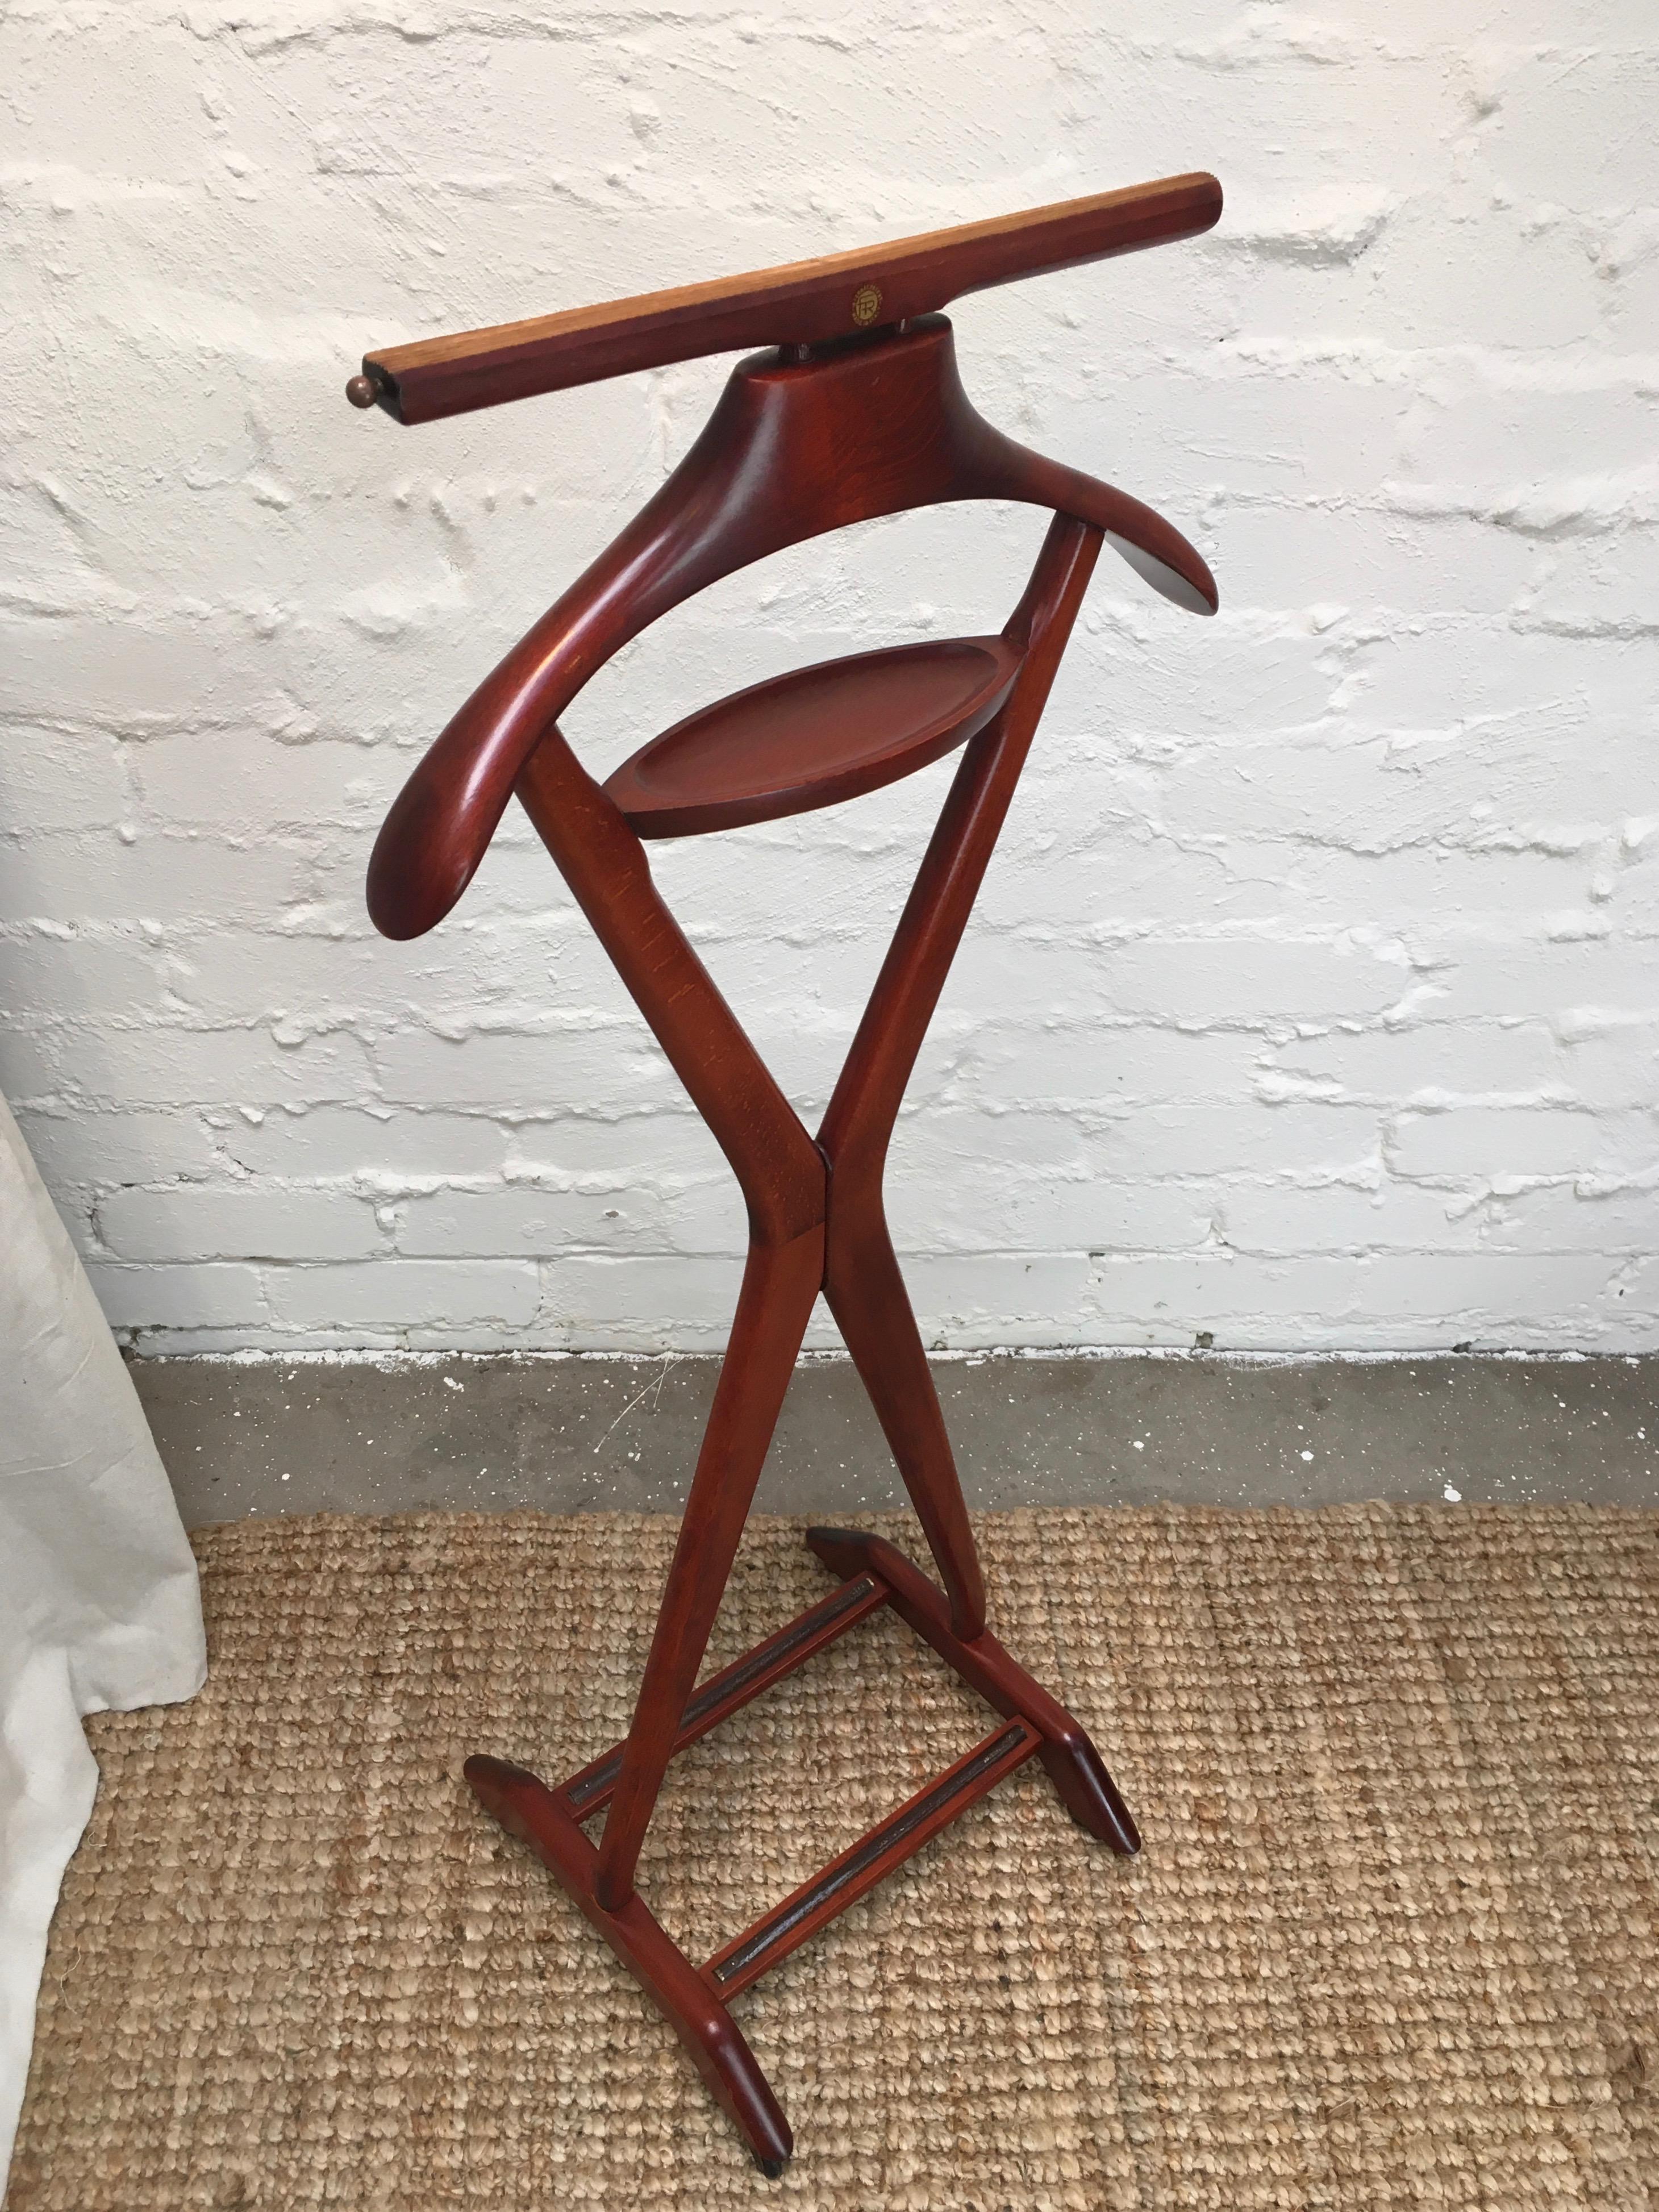 This Fratelli Reguitti X-form valet, in the style of Ico and Luisa Parisi, is in exceptionally good condition.

It features a lovely, rich mahogany stained beech timber frame, brass hardware and rubber wheels. The whole unit is tight and solid,